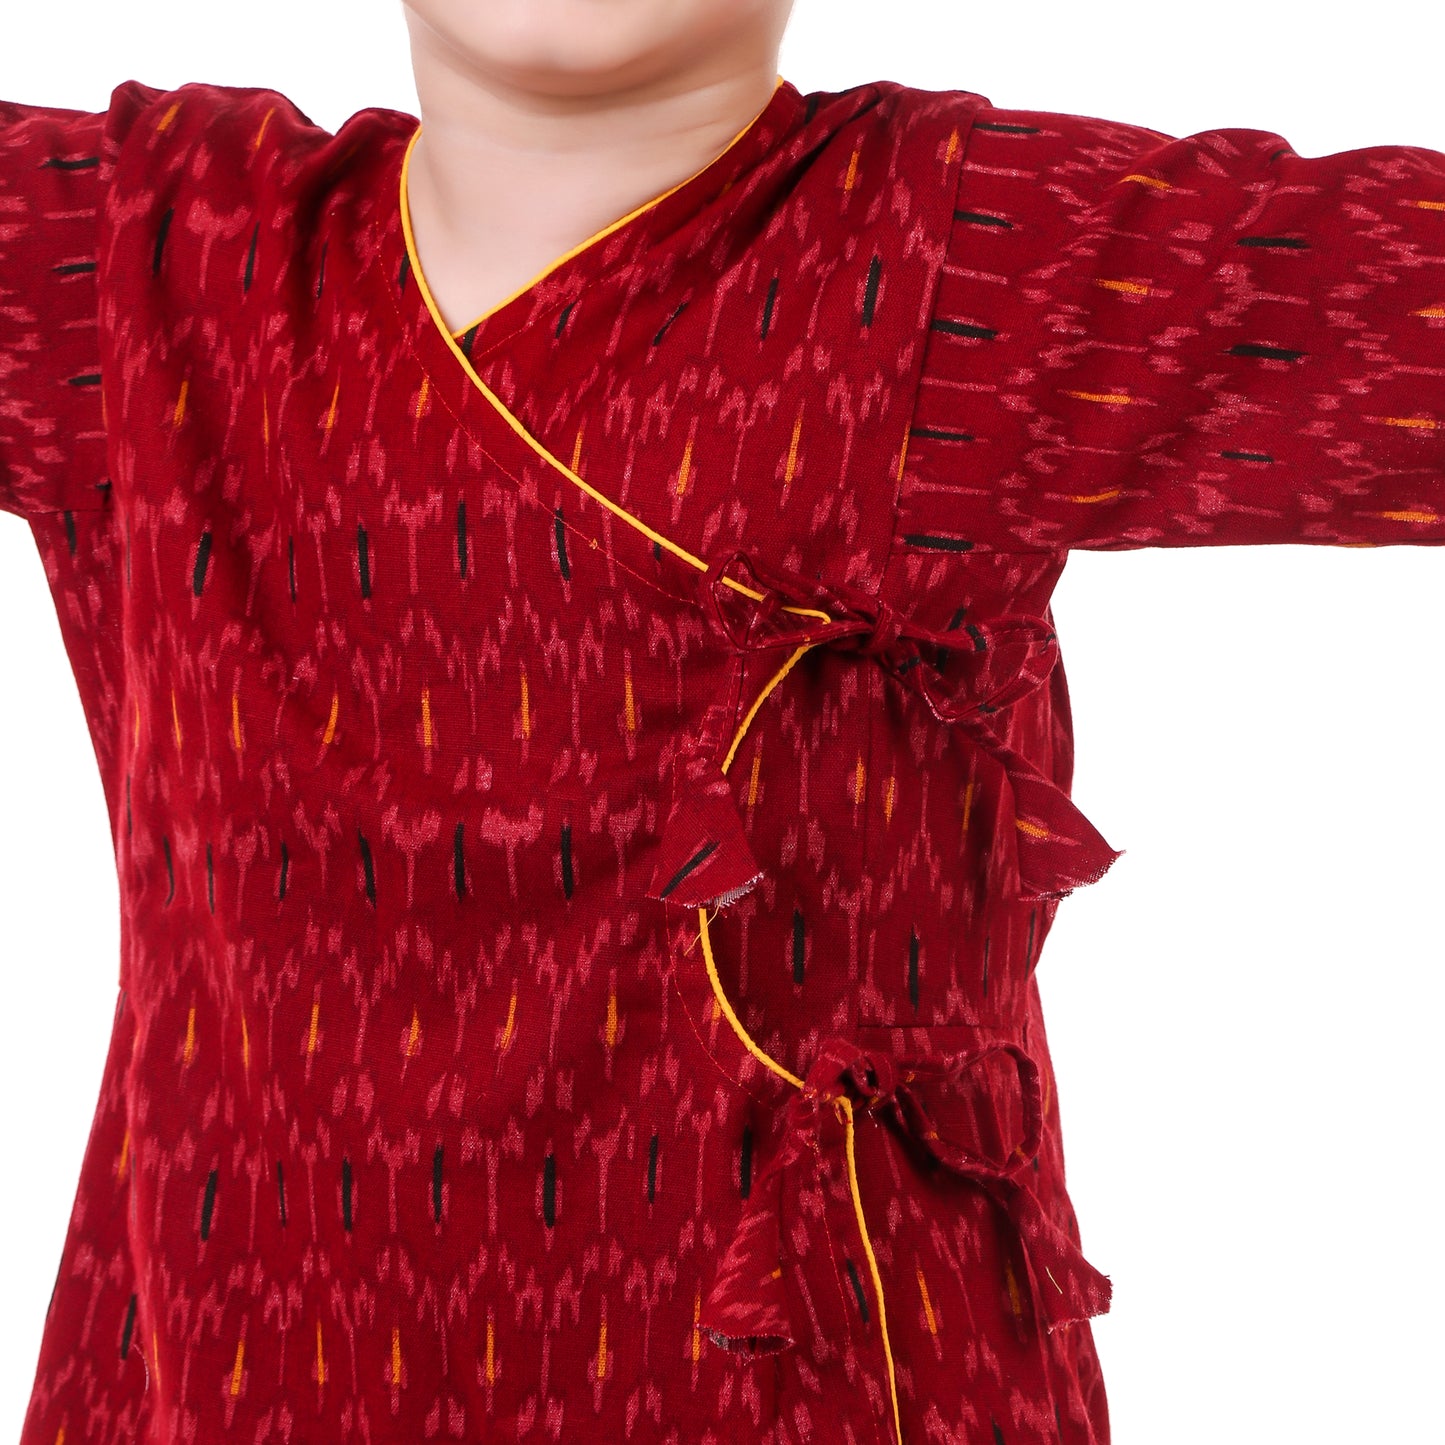 Maroon Dhoti Kurta for Boys, Ages 3 Months-16 Years, Cotton, Angrakha Style, Ikat Print